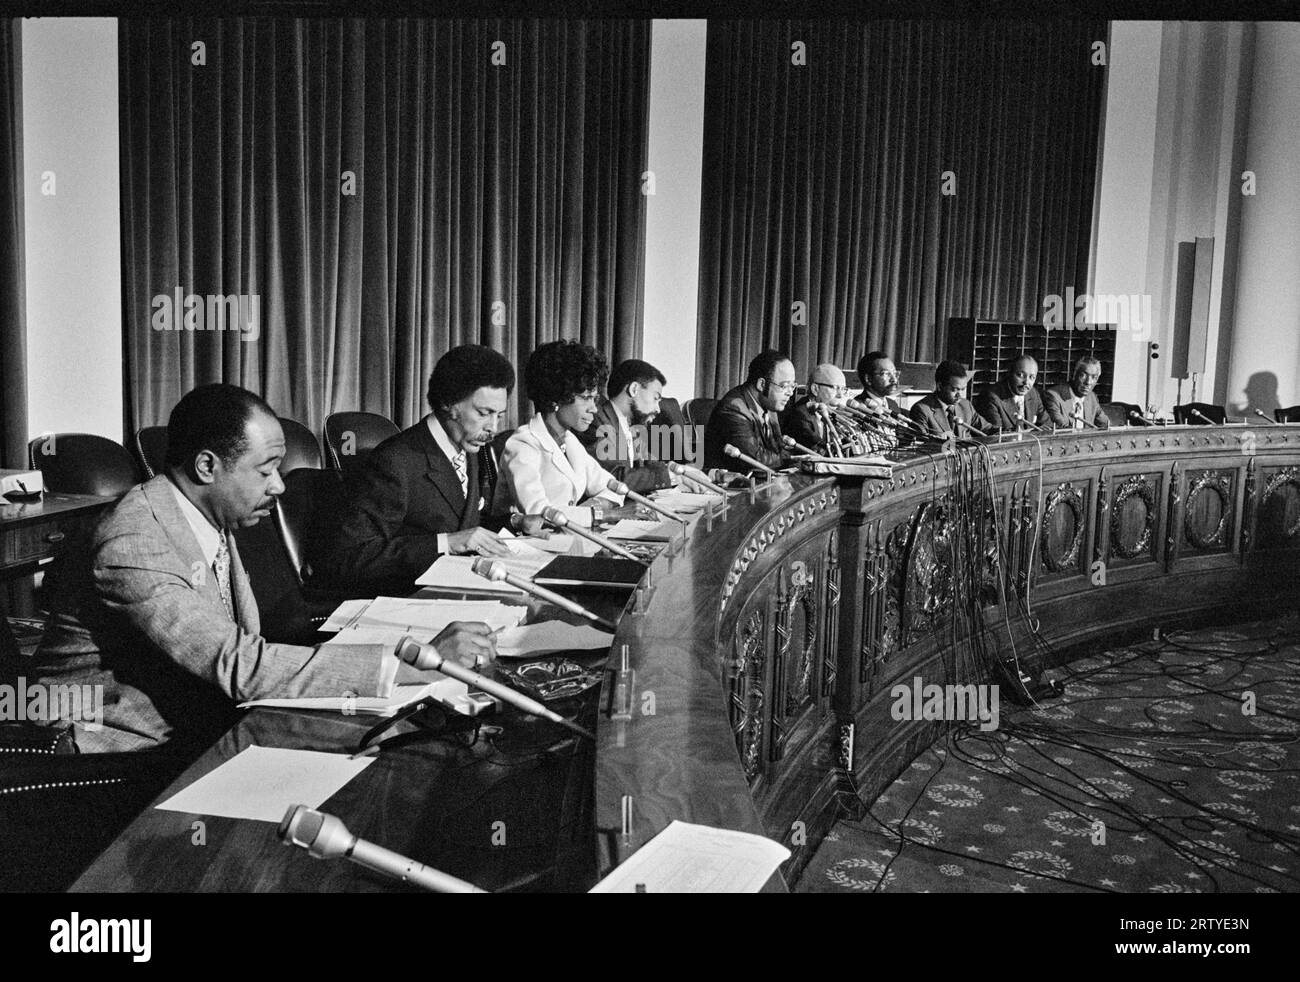 Washington, D.C.  May 24, 1971 Congressional Black Caucus members at a hearing. L-R: George W. Collins (D-Ill.), Ronald V. Dellums (D-Calif.), Shirley Chisholm (D-N.Y.), William L. Clay (D-Mo.), Charles C. Diggs, Jr. (D-Mich.), Augustus F. Hawkins (D-Calif.), Parren J. Mitchell (D-Md.), Walter Fauntroy (D-D.C.), Louis Stokes (D-Ohio), Ralph Metcalfe (D-Ill.) Stock Photo